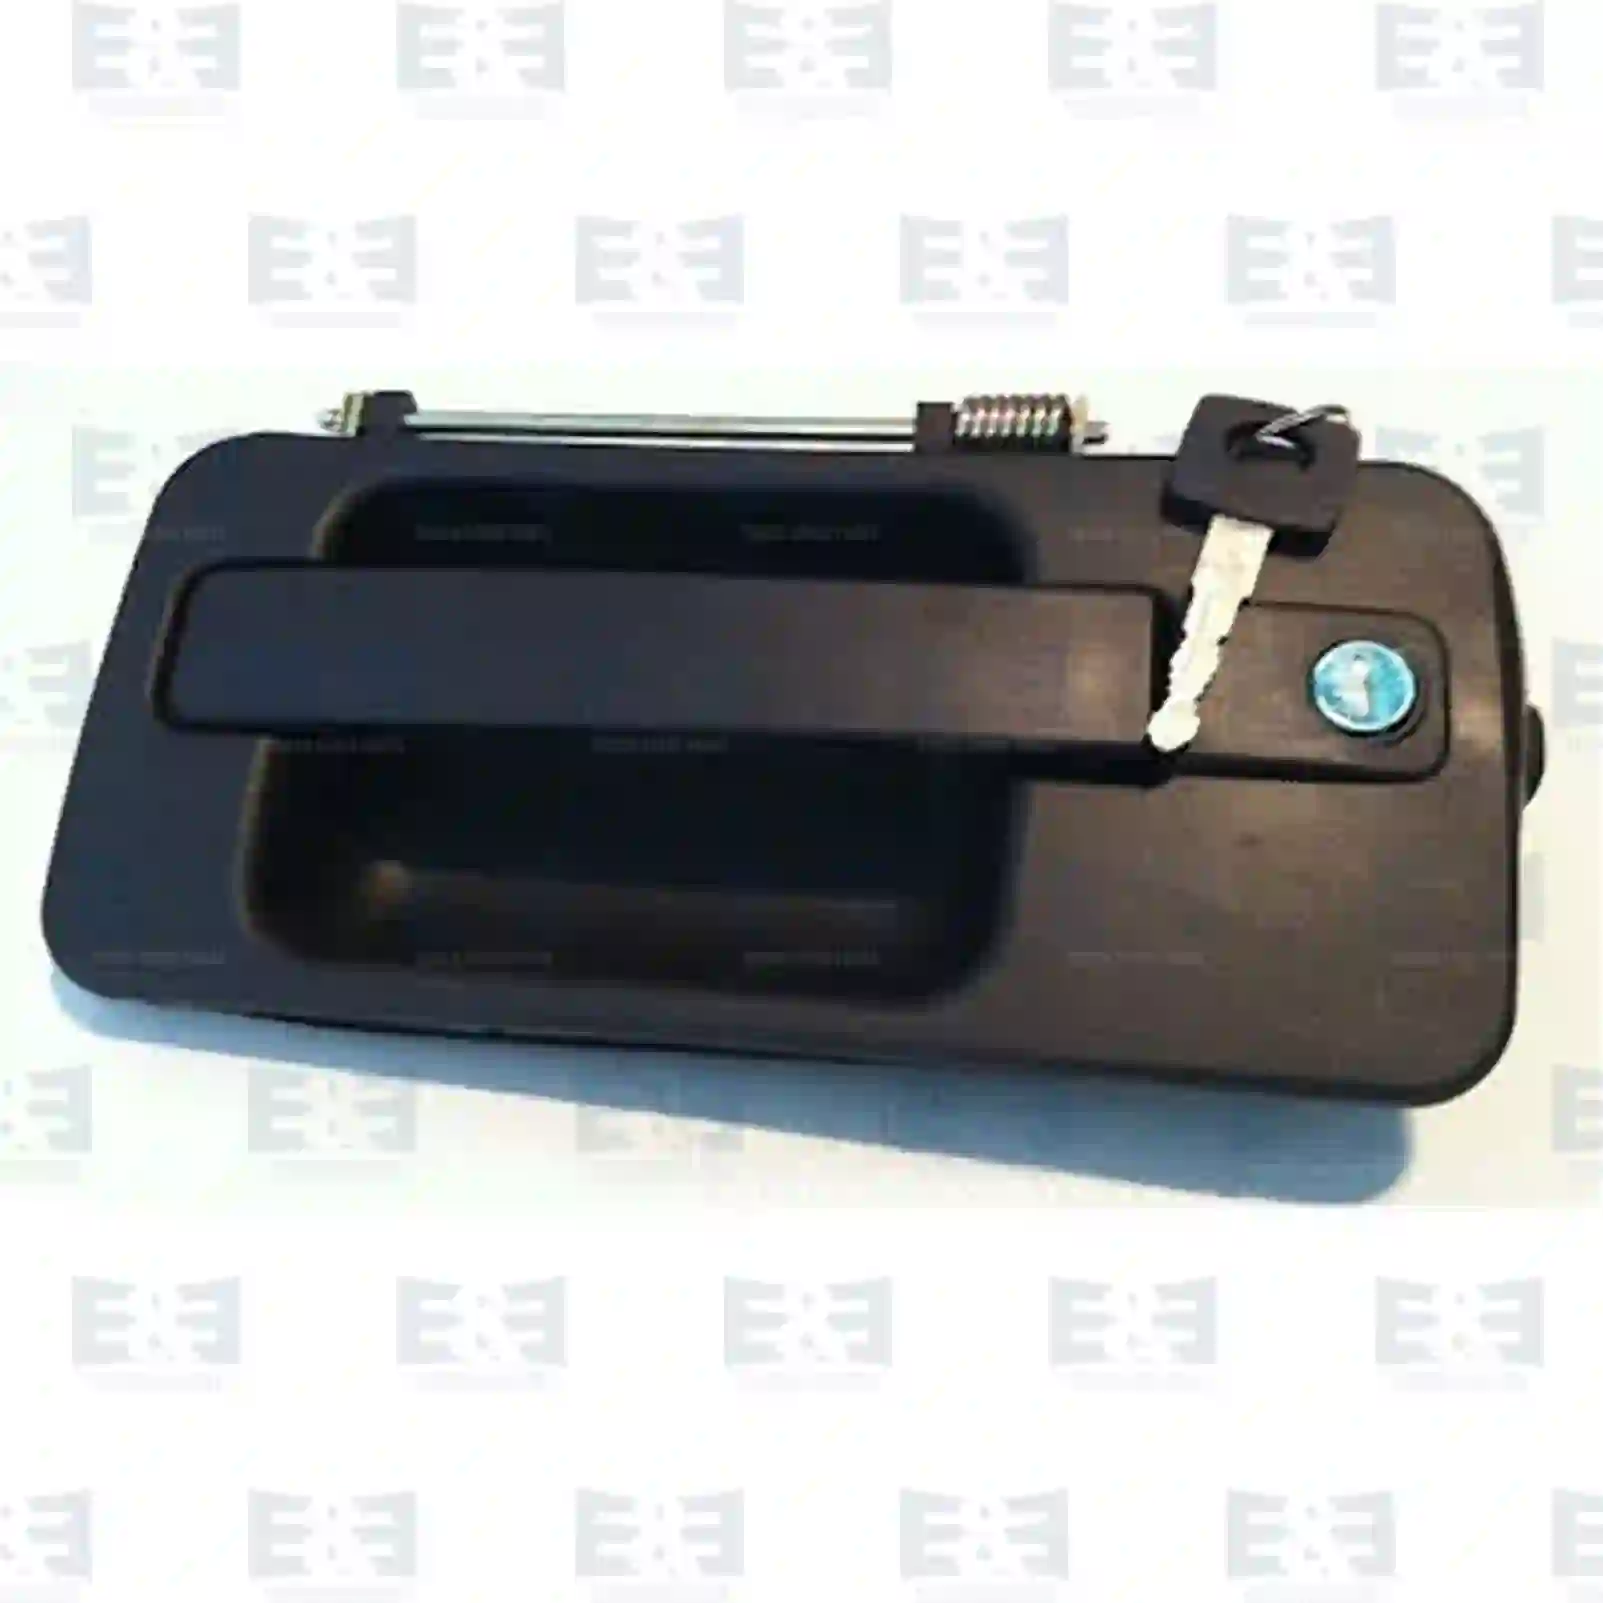 Door handle, left, complete with lock cylinder, 2E2292150, 9437600159 ||  2E2292150 E&E Truck Spare Parts | Truck Spare Parts, Auotomotive Spare Parts Door handle, left, complete with lock cylinder, 2E2292150, 9437600159 ||  2E2292150 E&E Truck Spare Parts | Truck Spare Parts, Auotomotive Spare Parts